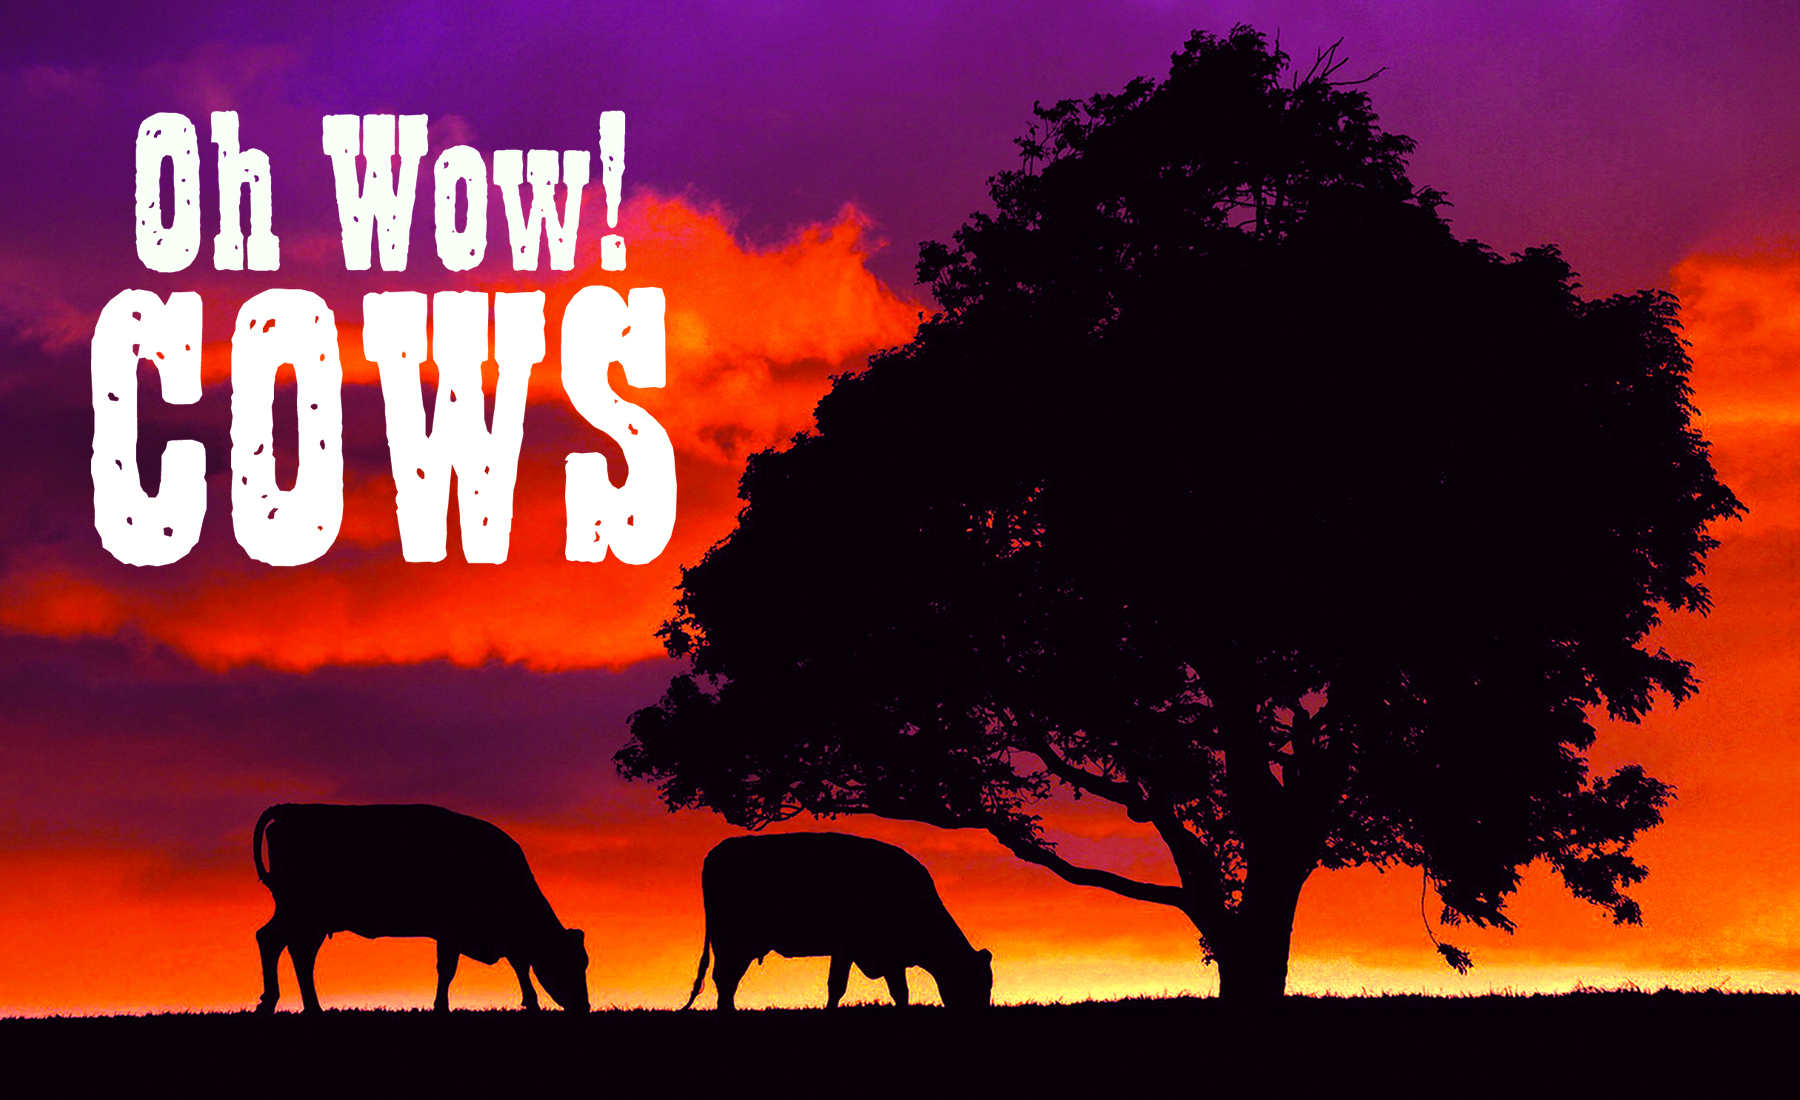 “Oh Wow! Cows” featured